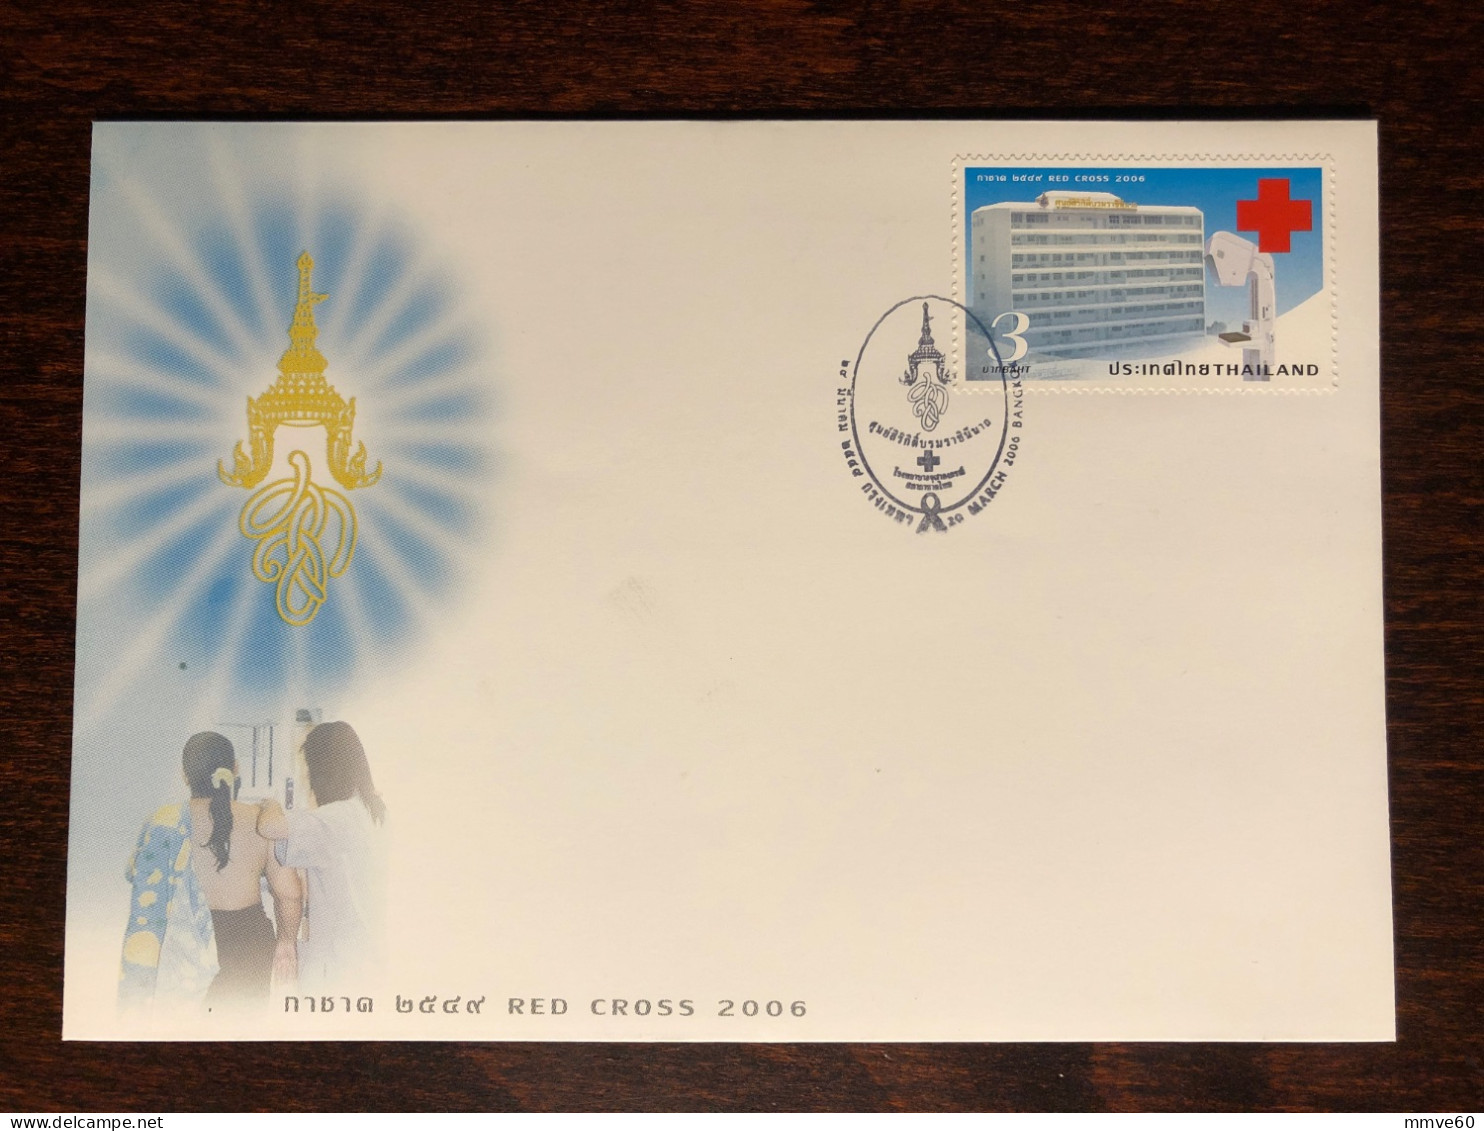 THAILAND FDC COVER 2006 YEAR BREAST CANCER RED CROSS HEALTH MEDICINE STAMPS - Thailand